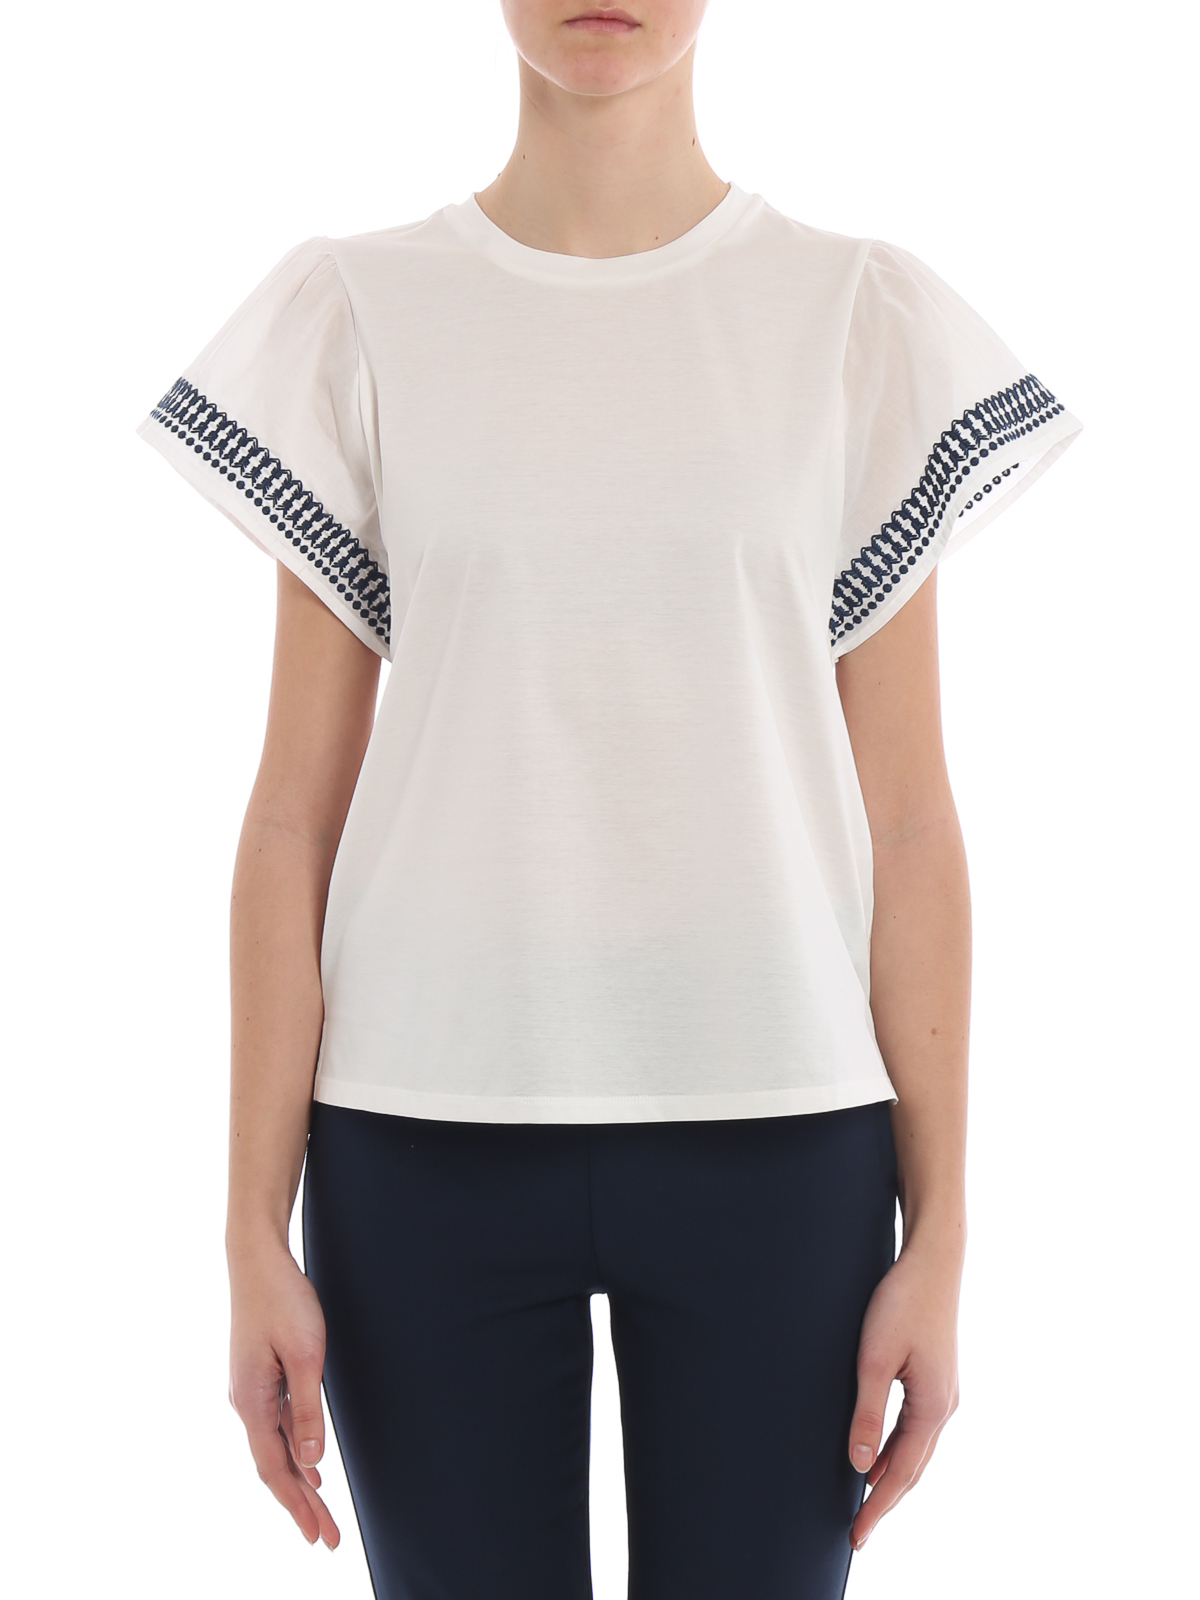 T-shirts Weekend Max Mara - Cerchio embroidered T-shirt - 594110916002